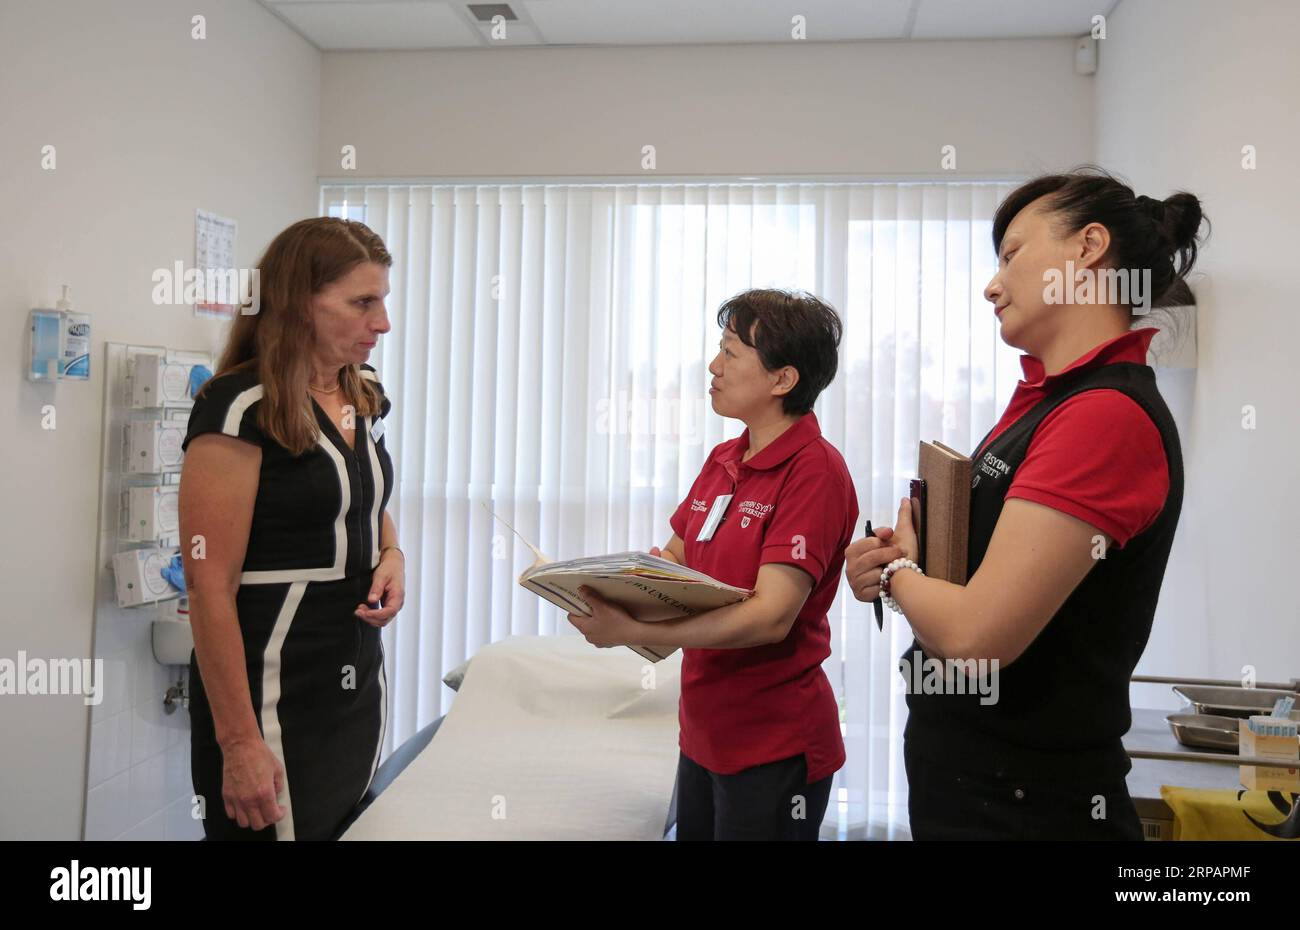 (190517) -- BEIJING, May 17, 2019 (Xinhua) -- Lisa Holden (L), student supervisor of the Chinese medicine center of the Western Sydney University (WSU), works at the Chinese medicine center of the WSU in Sydney, Australia, on April 8, 2019. (Xinhua/Bai Xuefei) Xinhua Headlines: From museums to medicine, China and Asia-Pacific neighbors expanding cultural engagement PUBLICATIONxNOTxINxCHN Stock Photo